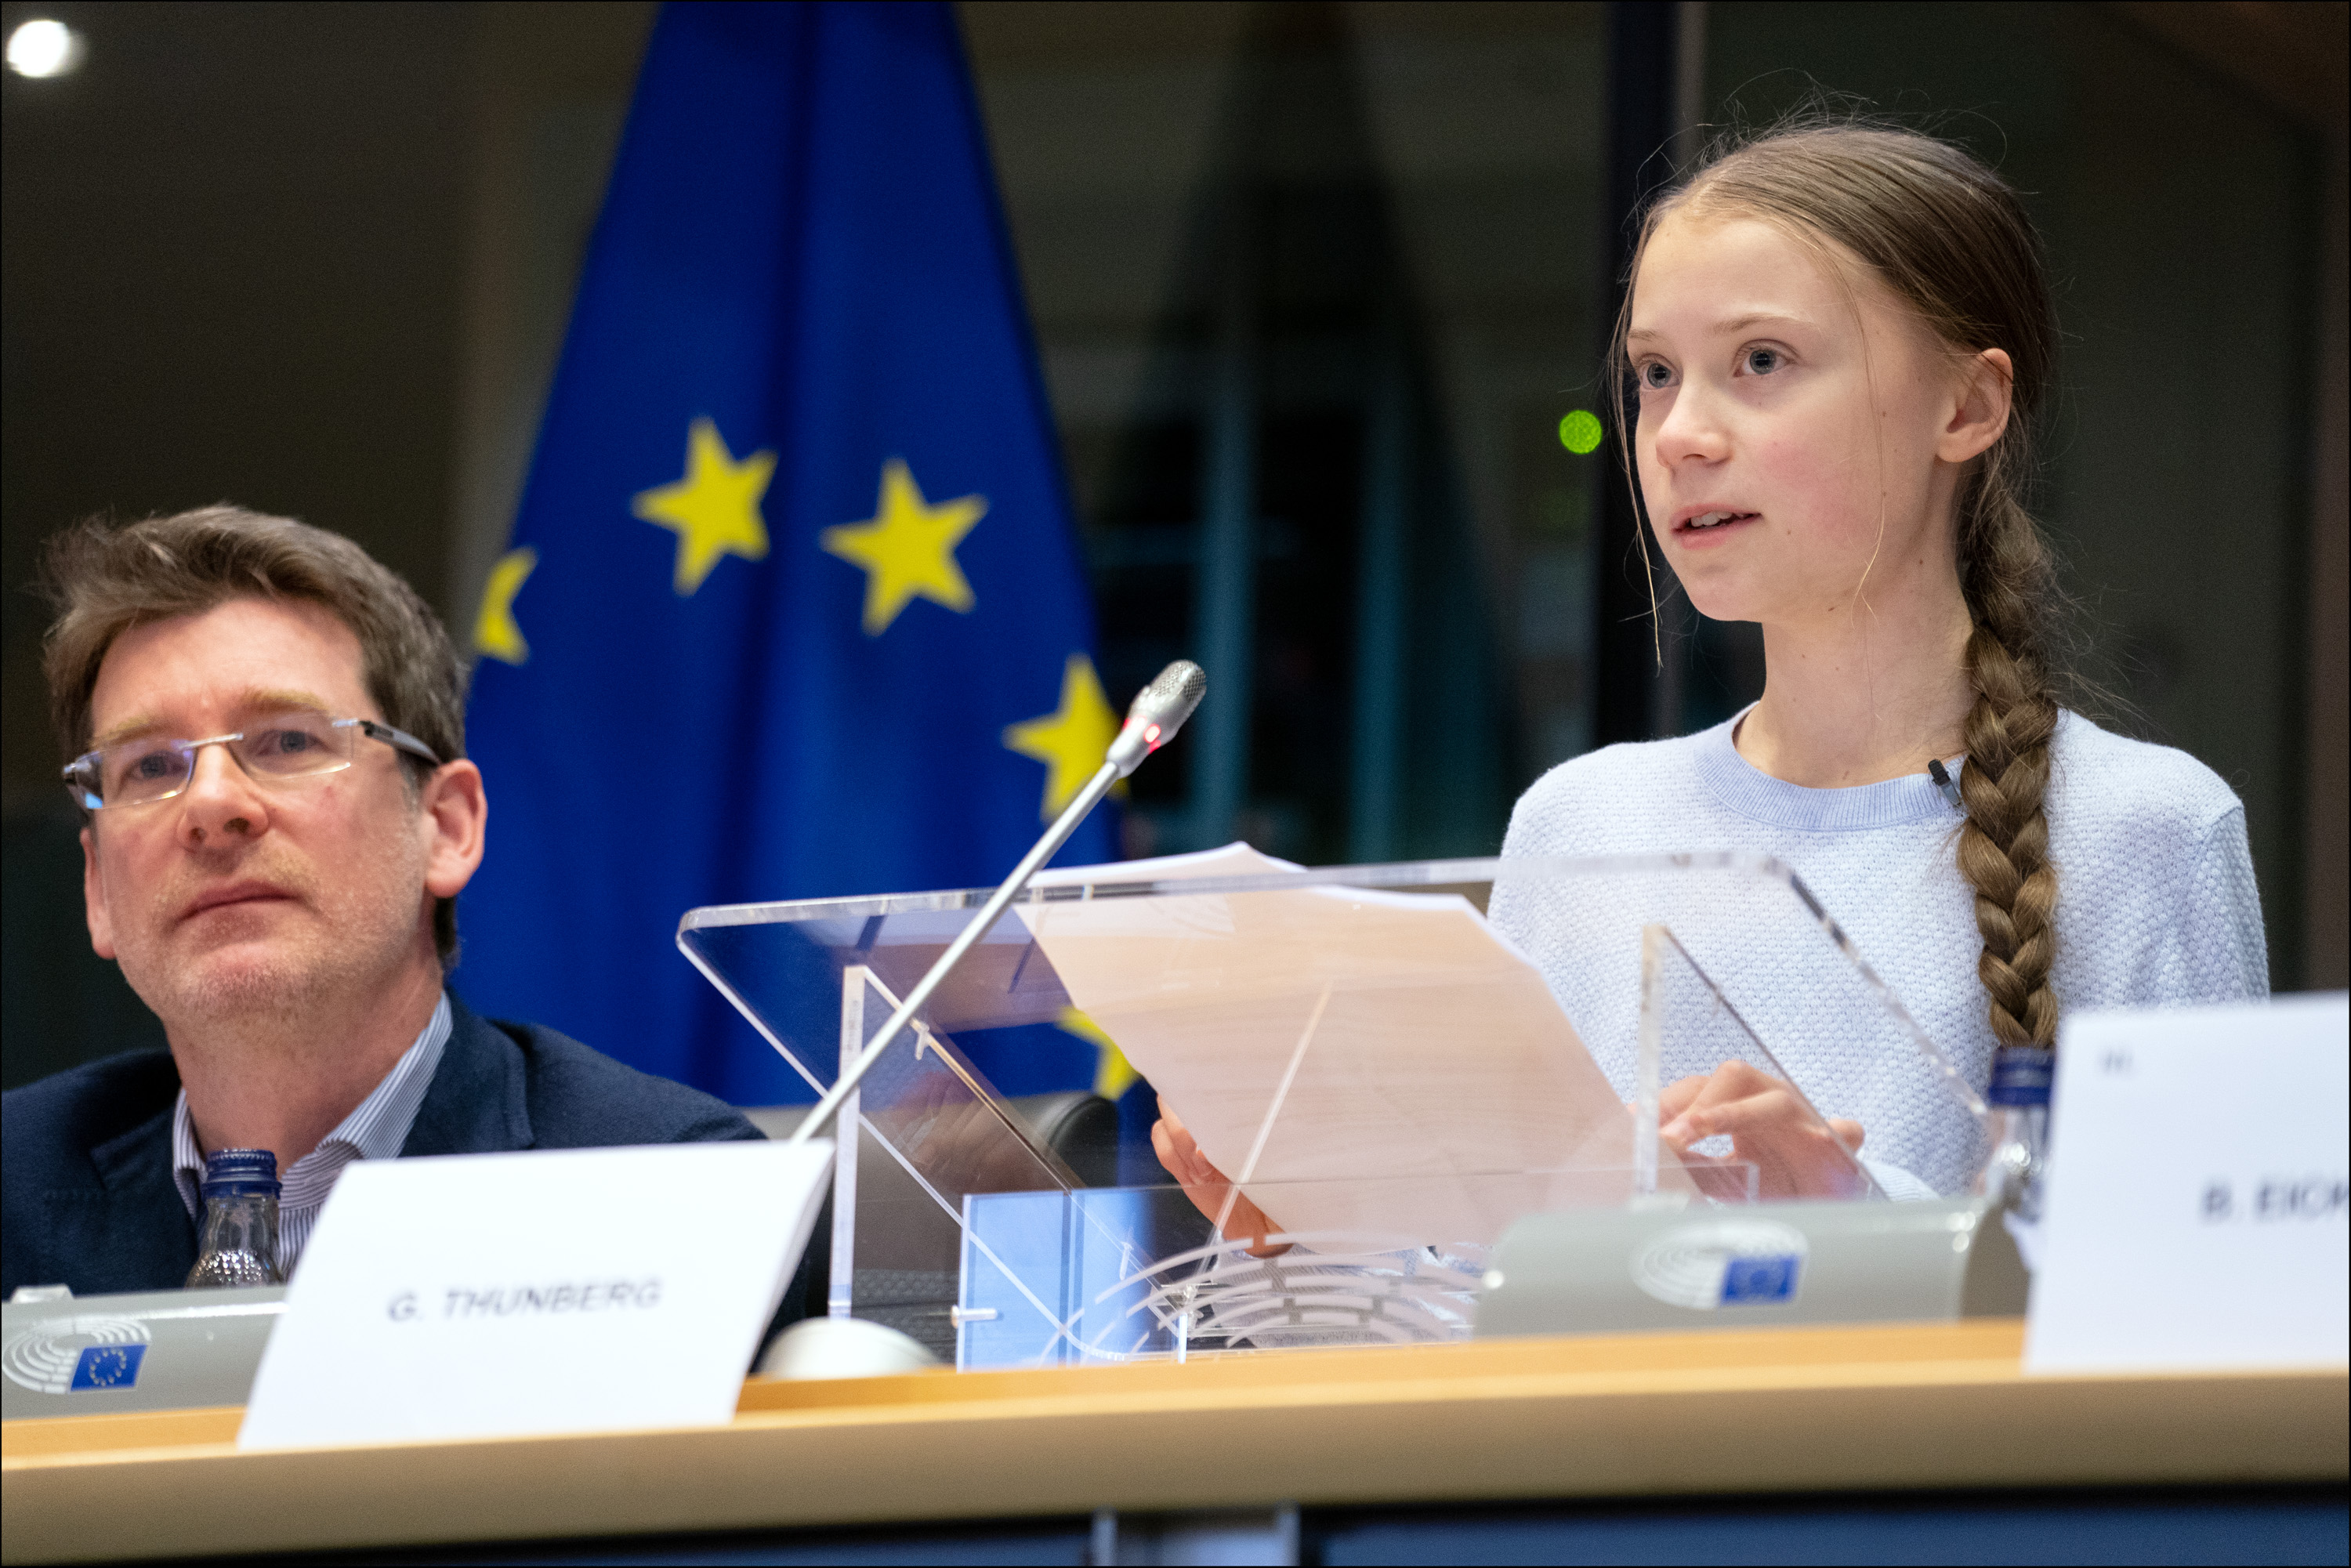 Image of Greta Thunberg in March 4, 2020.